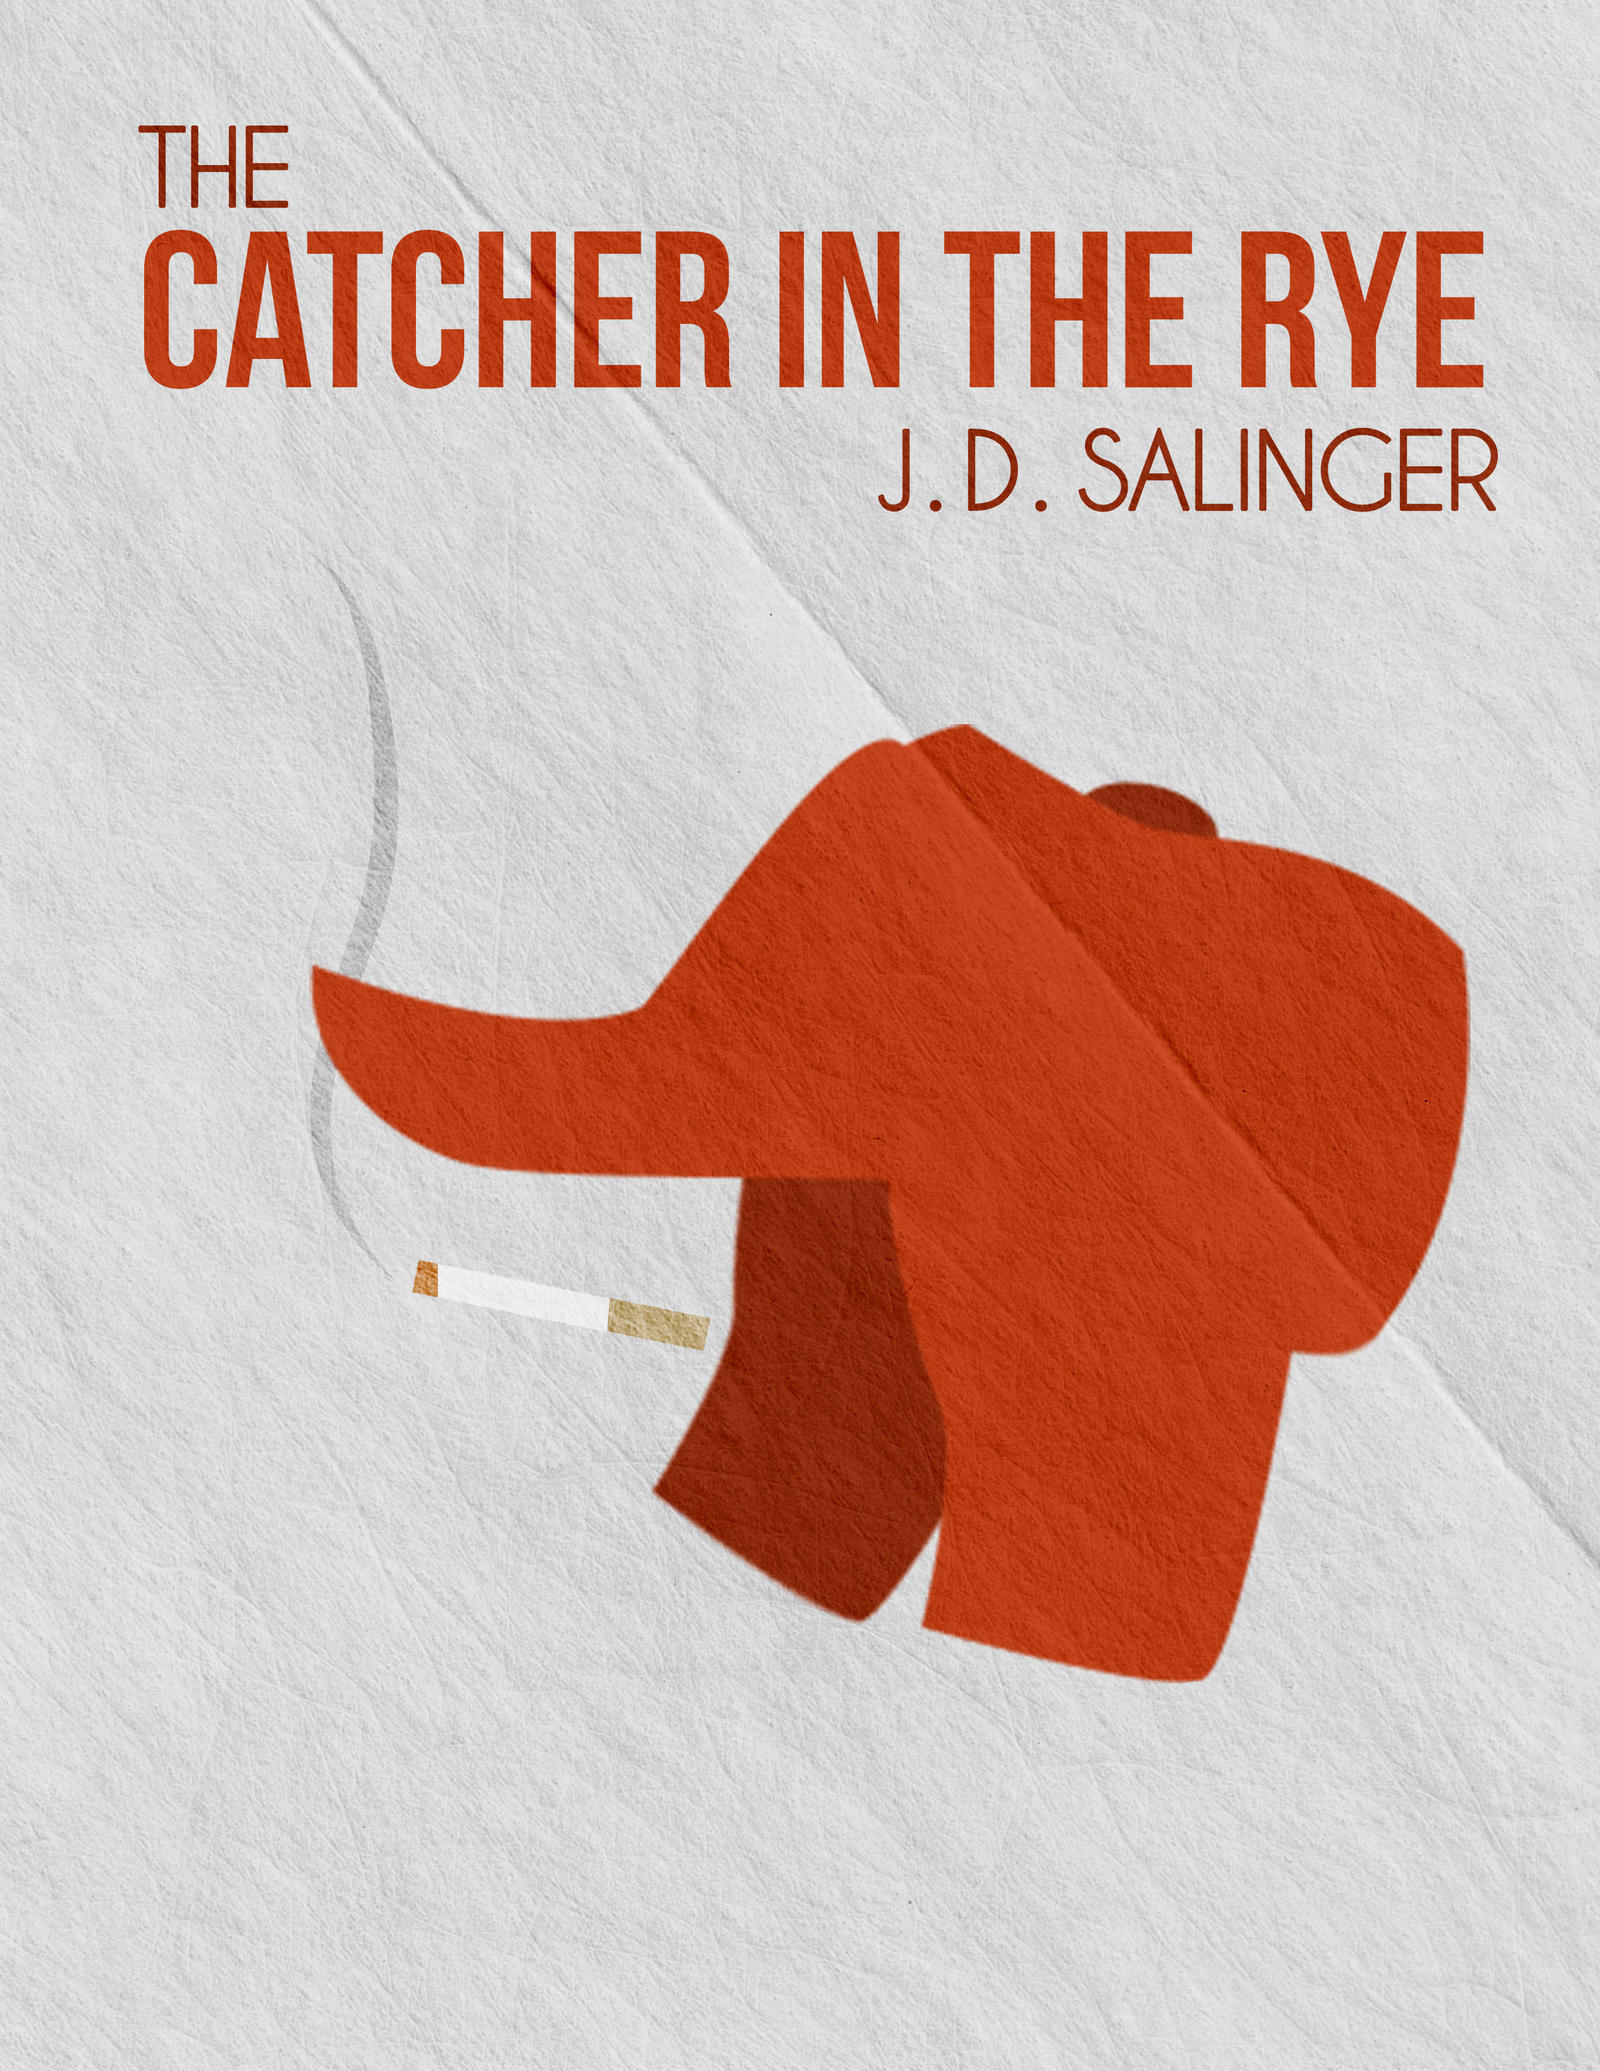 Essay on catcher in the rye